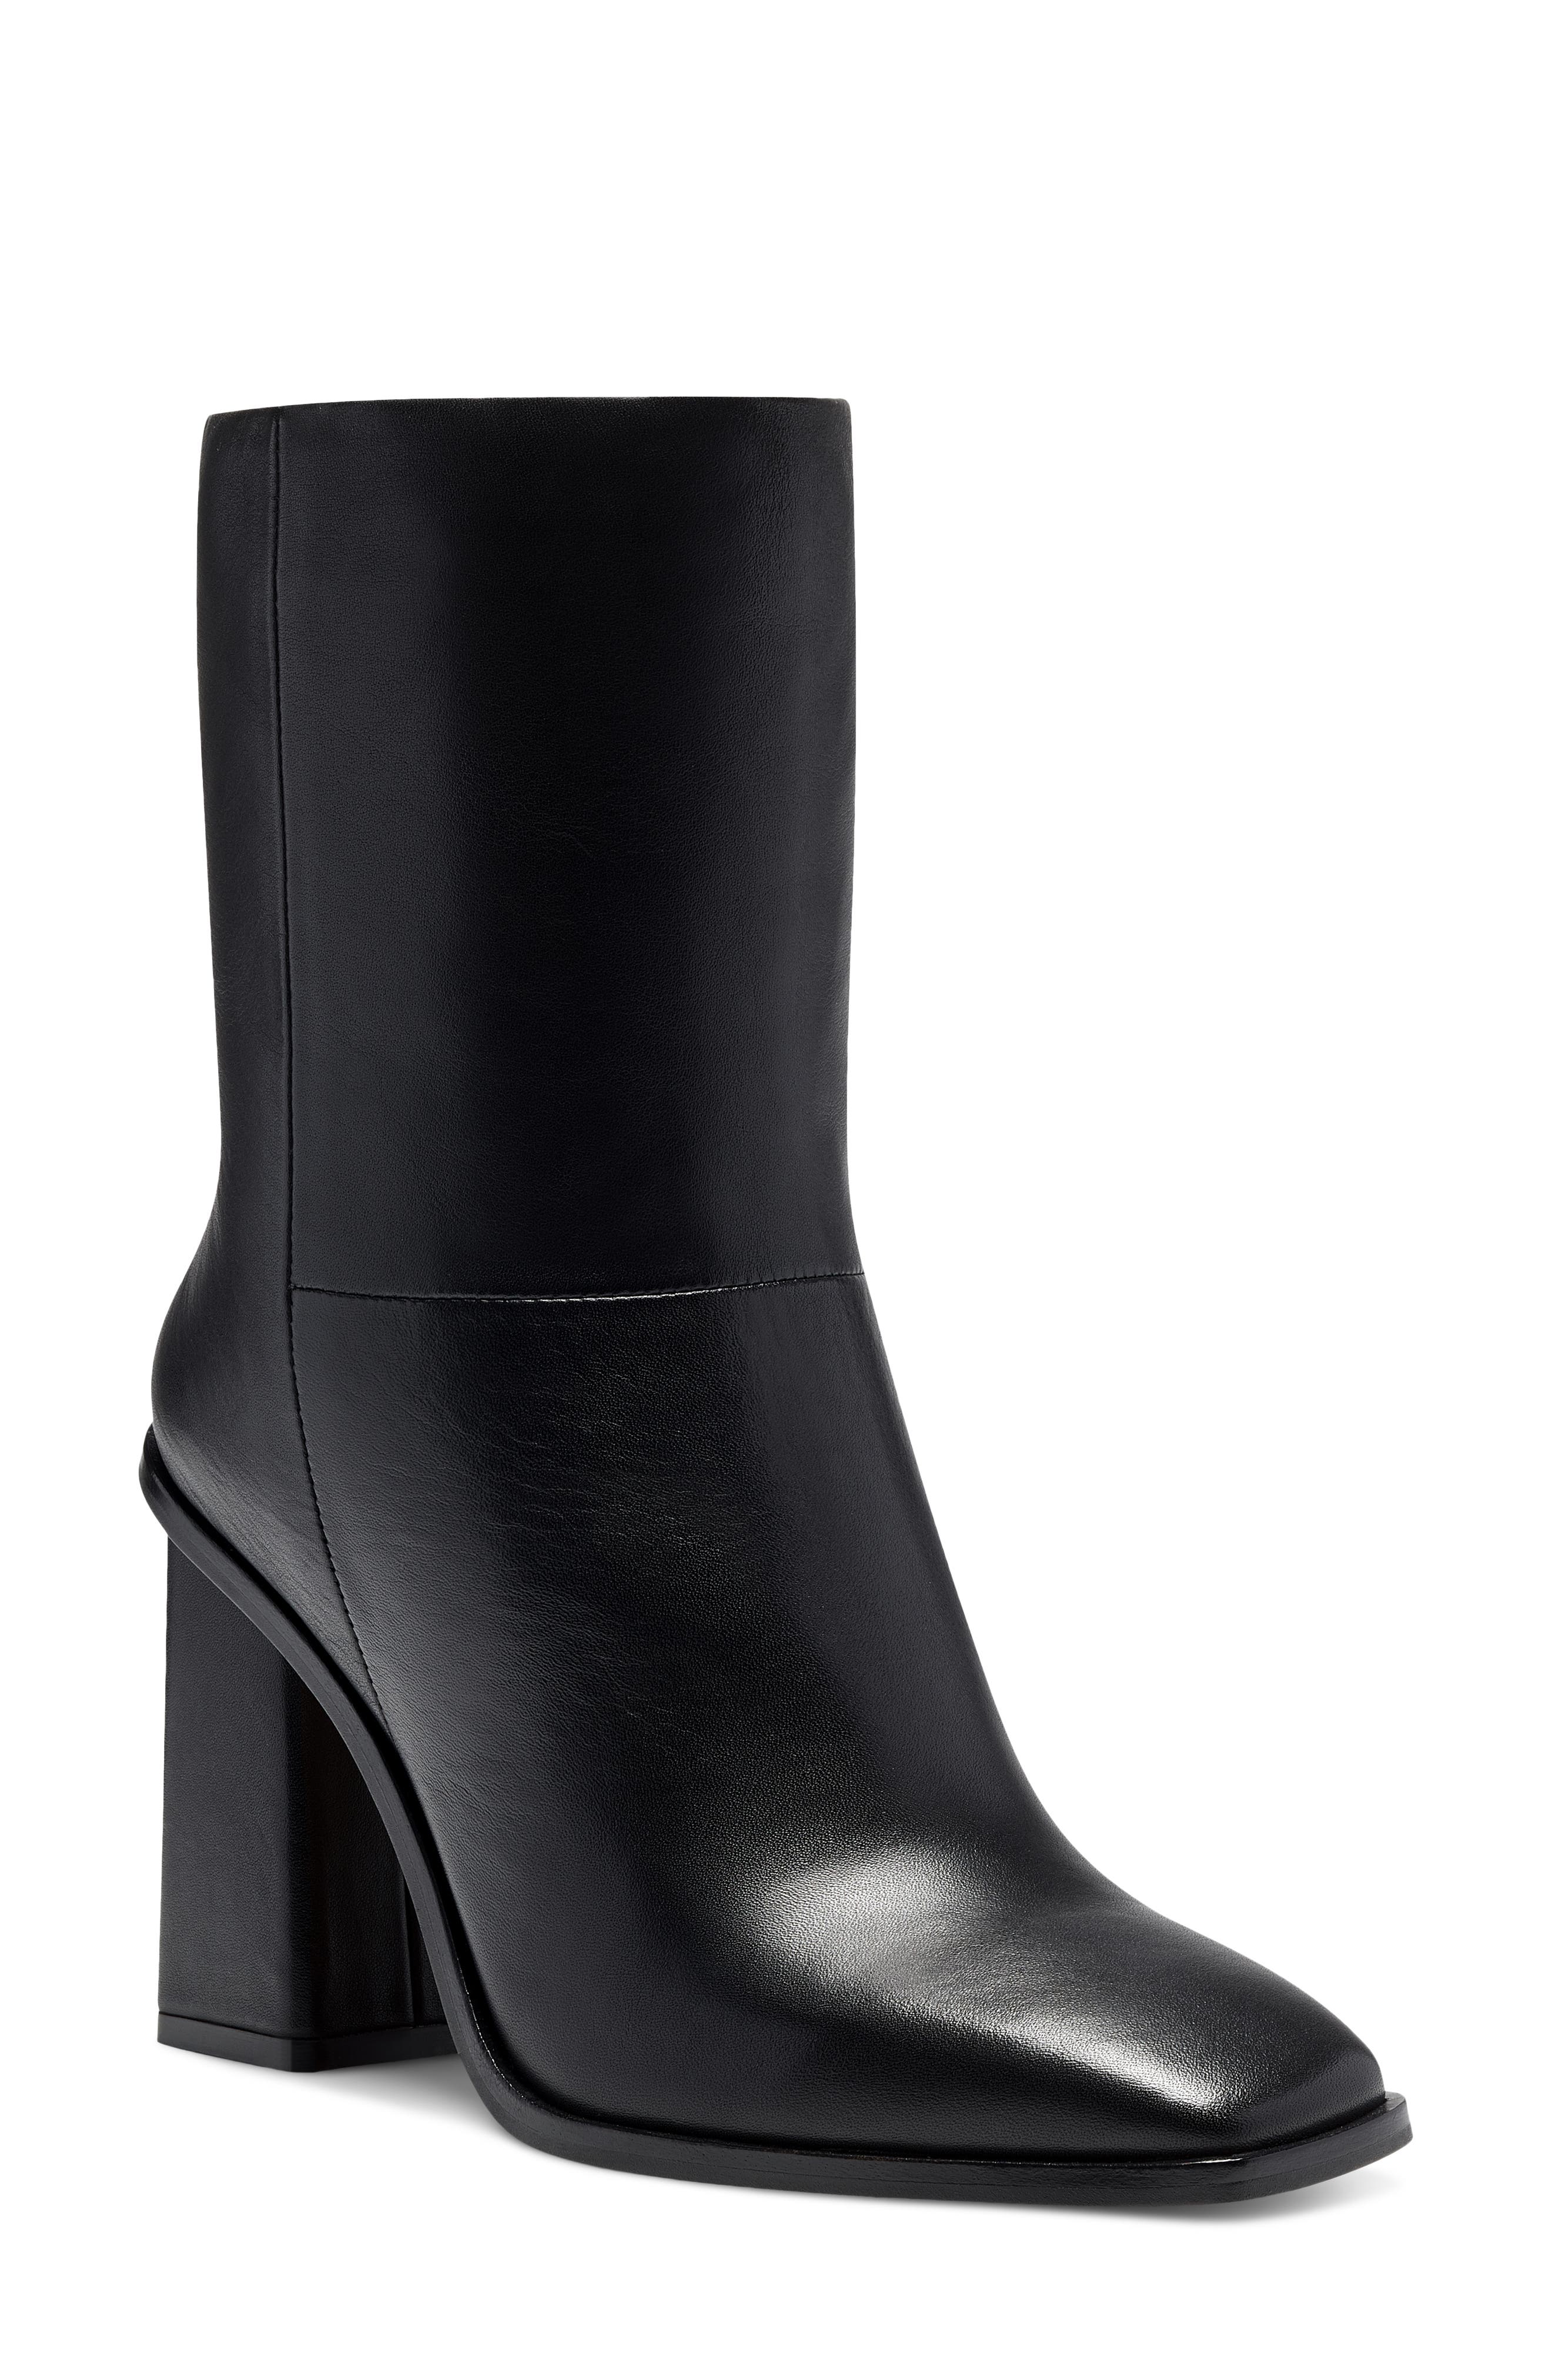 vince camuto women's walden round toe leather booties